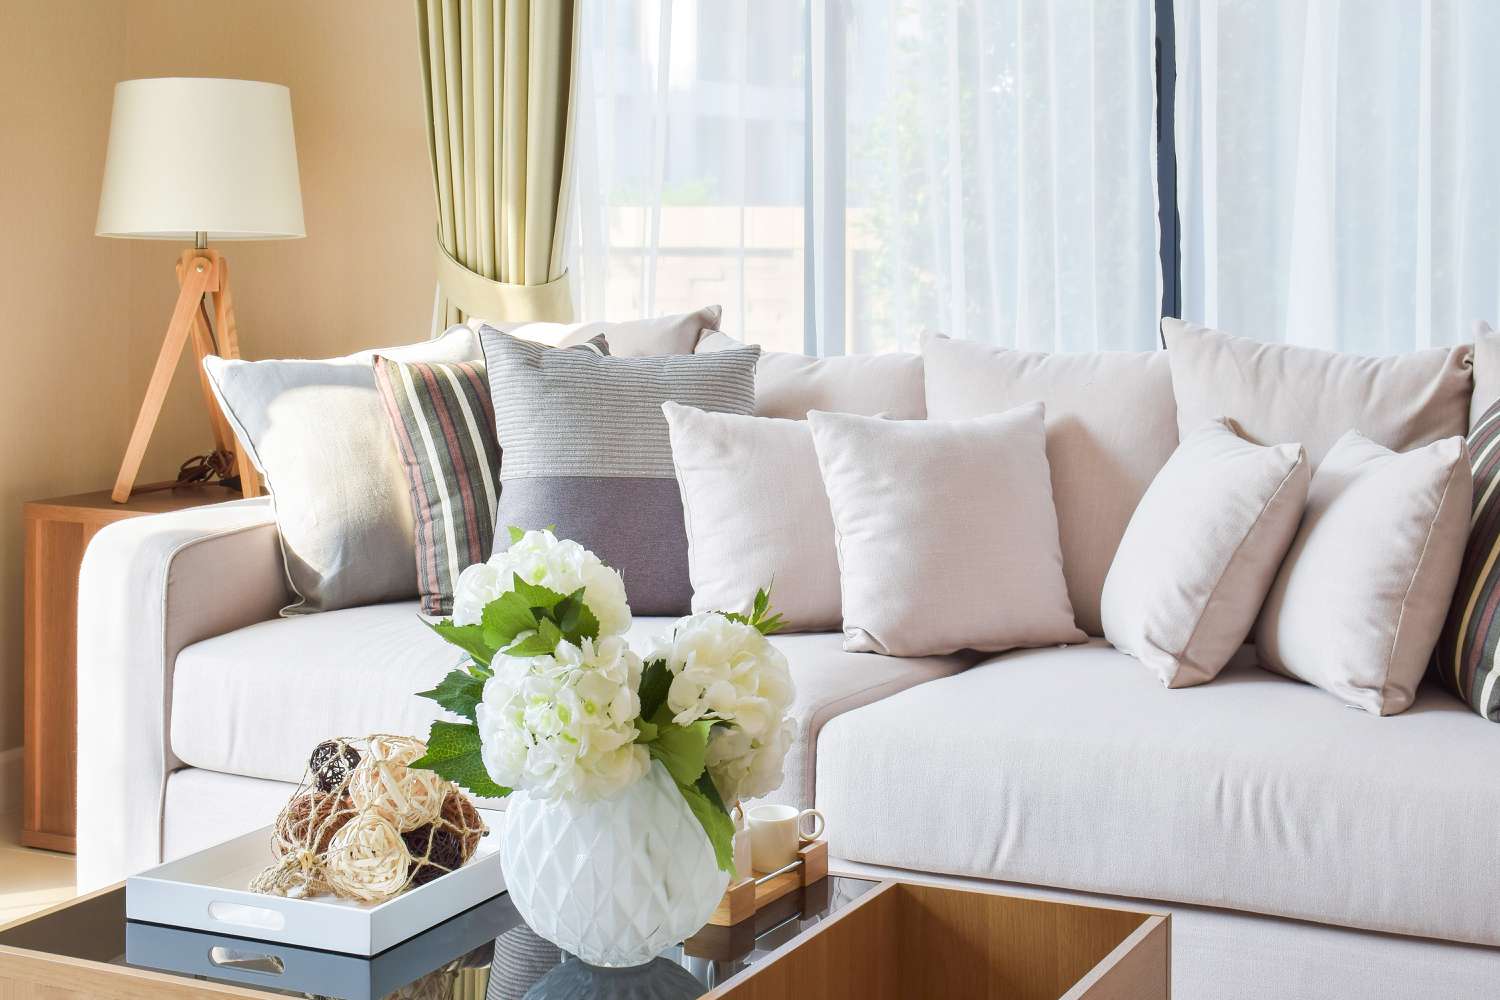 How To Clean Throw Pillows: Experts Offer Laundry Lessons